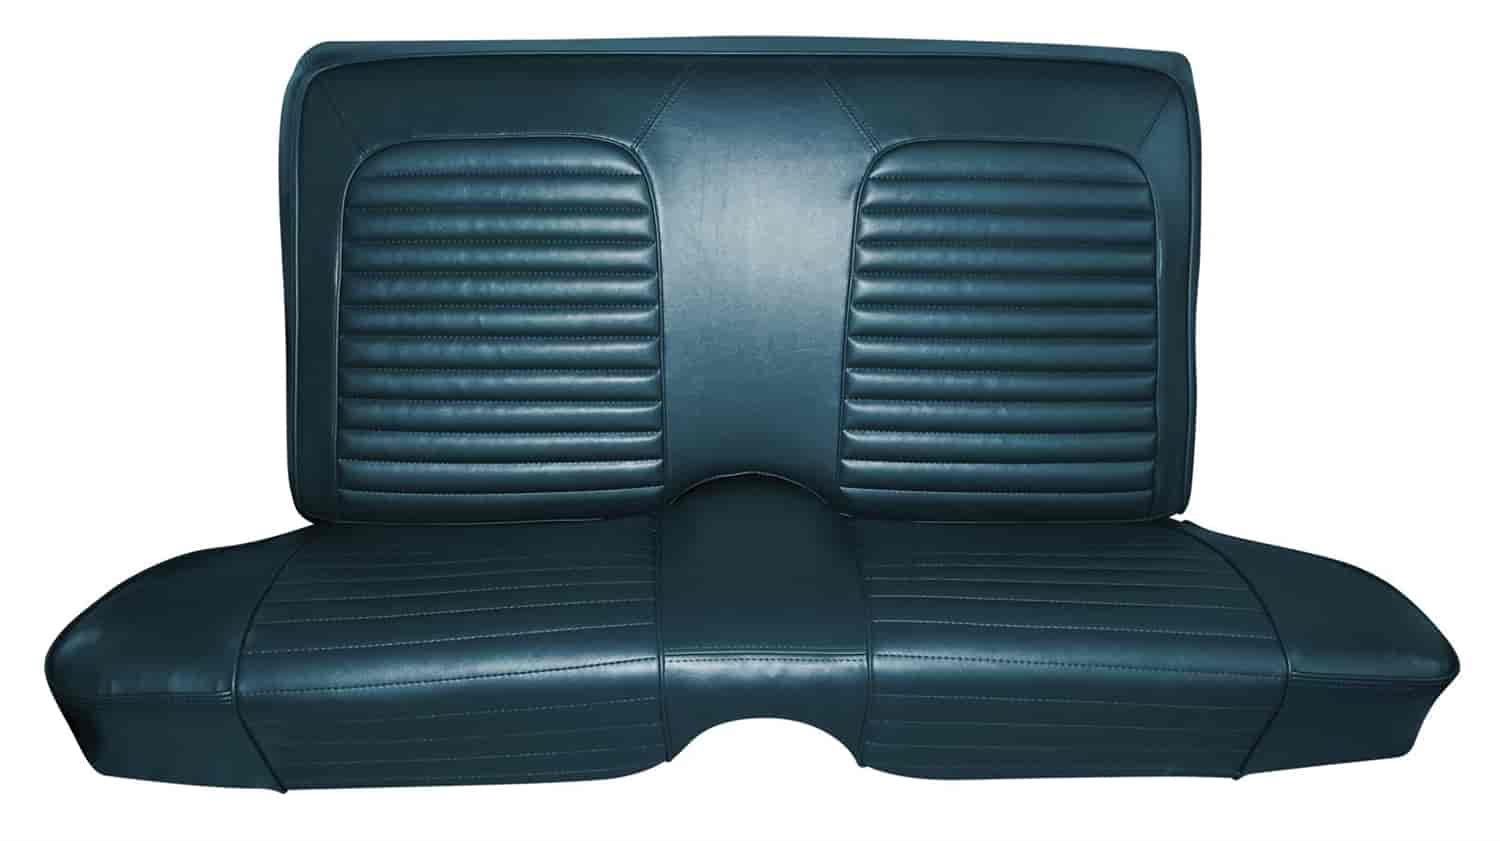 1965 Ford Falcon Futura 2-Door Hardtop Interior Front and Rear Bench Seat Upholstery Set